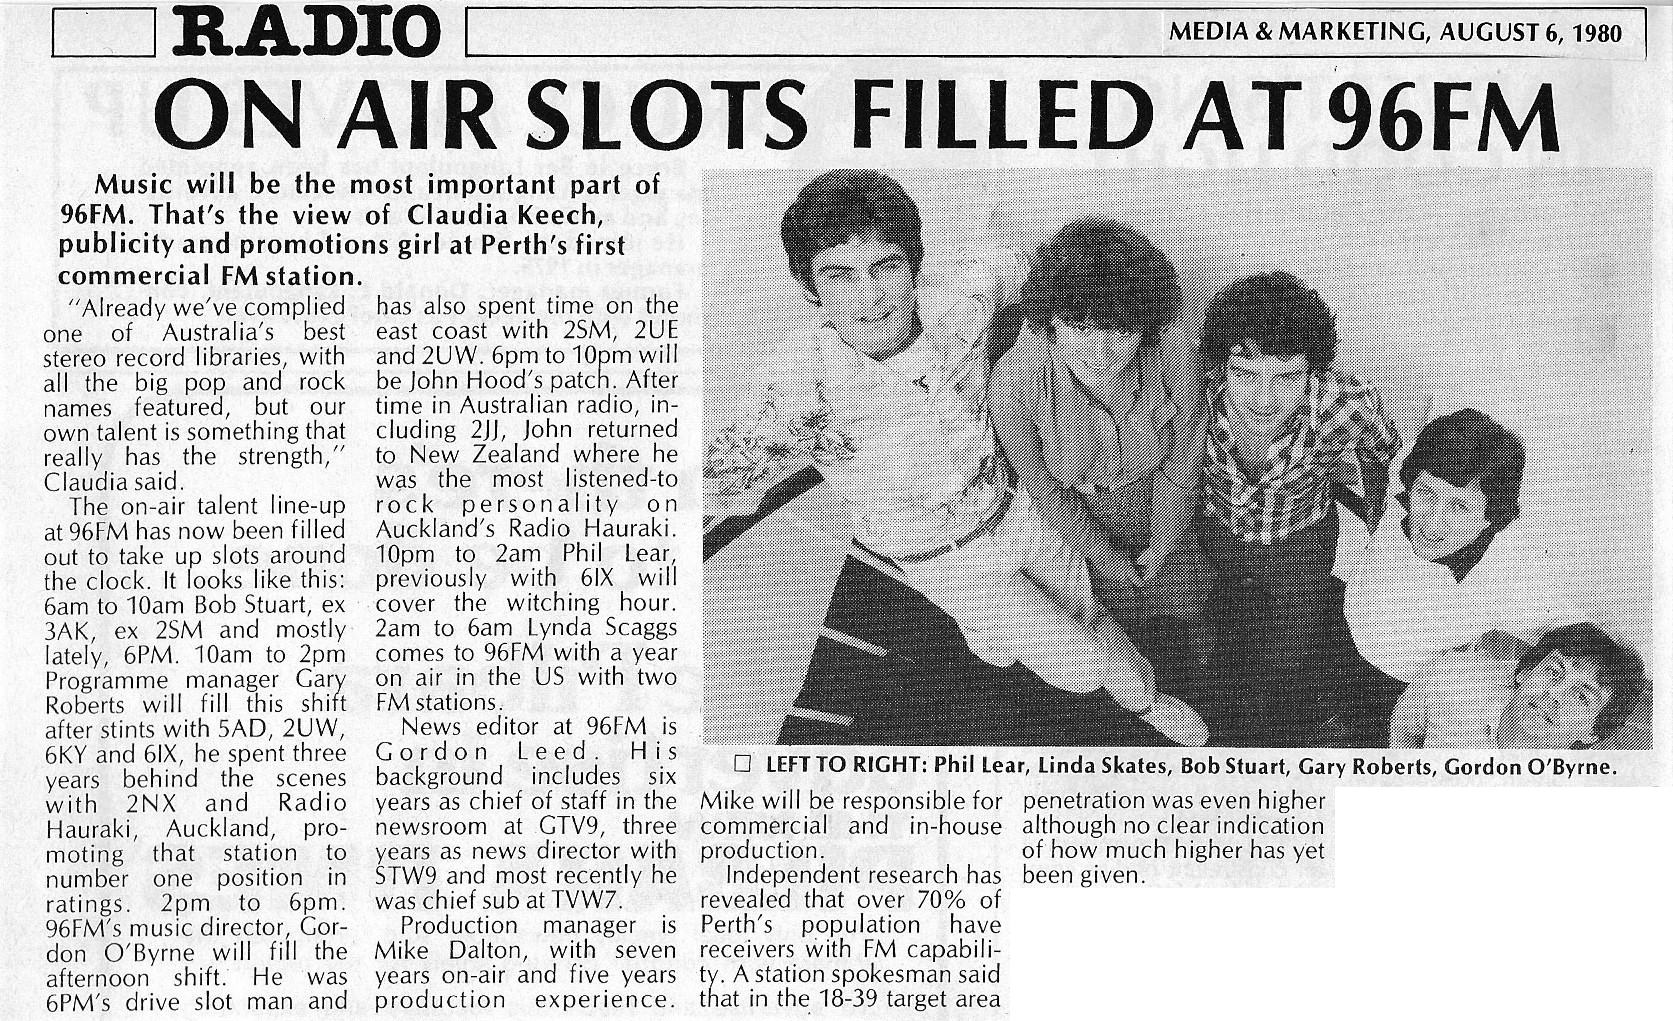 1980.08.06 - On Air Slots Filled at 96FM - Media & Marketing.png